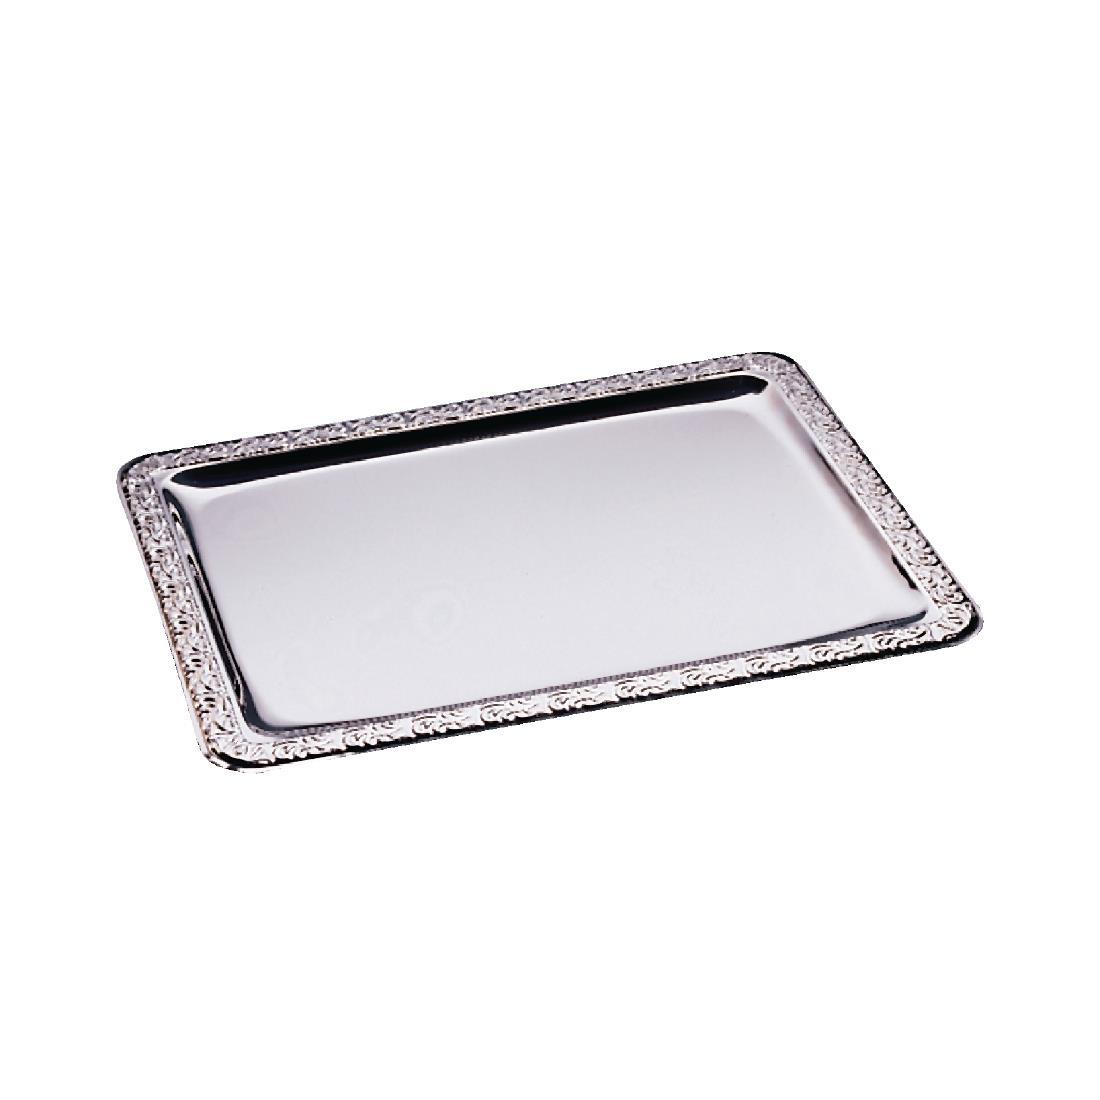 APS Stainless Steel Rectangular Service Tray 420mm - P005  - 1